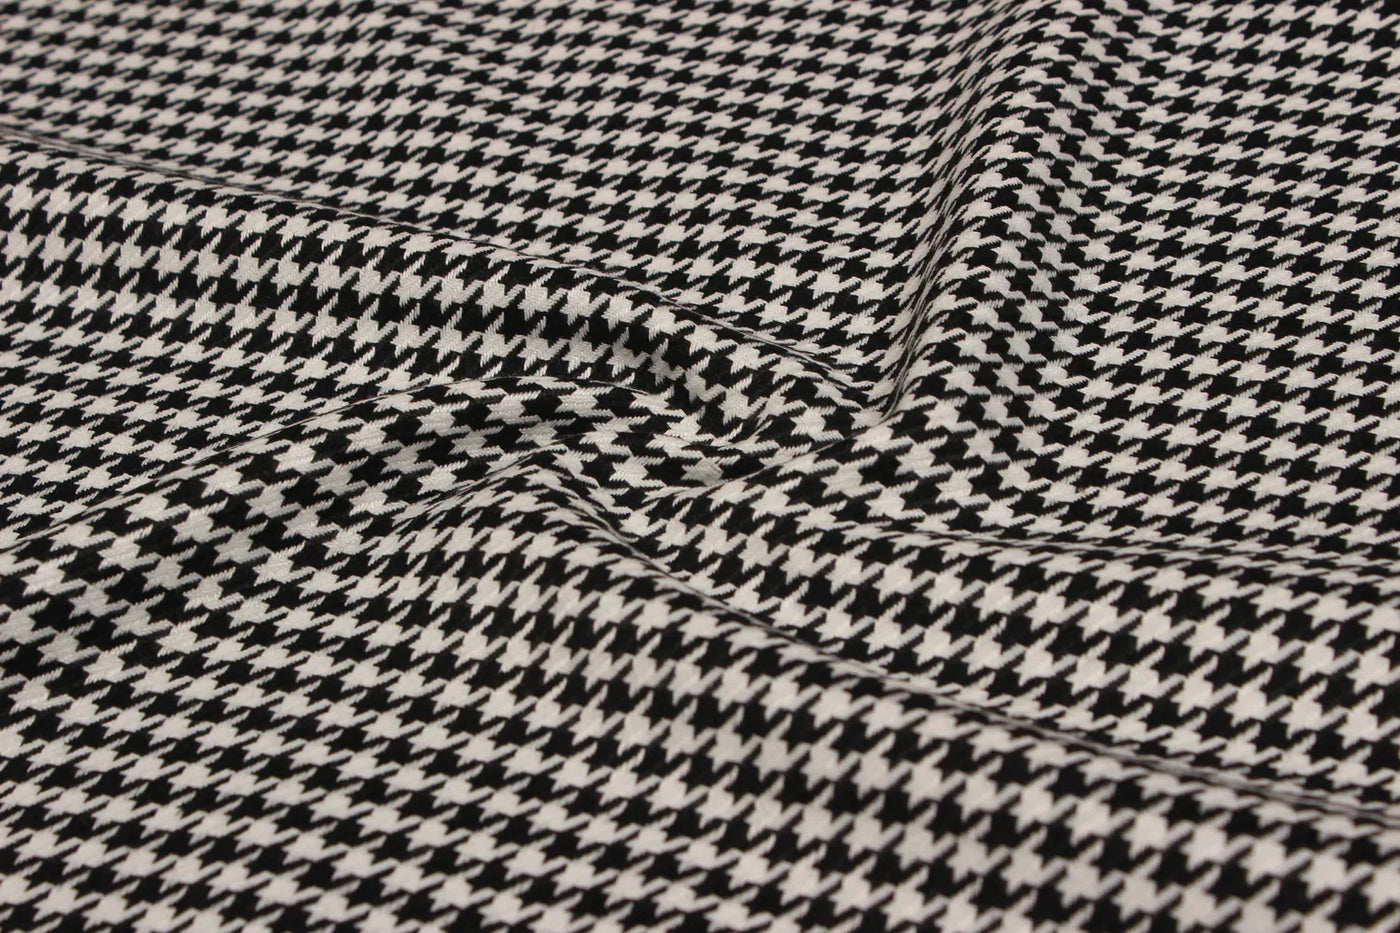 Black and White Houndstooth Tweed Fabric1